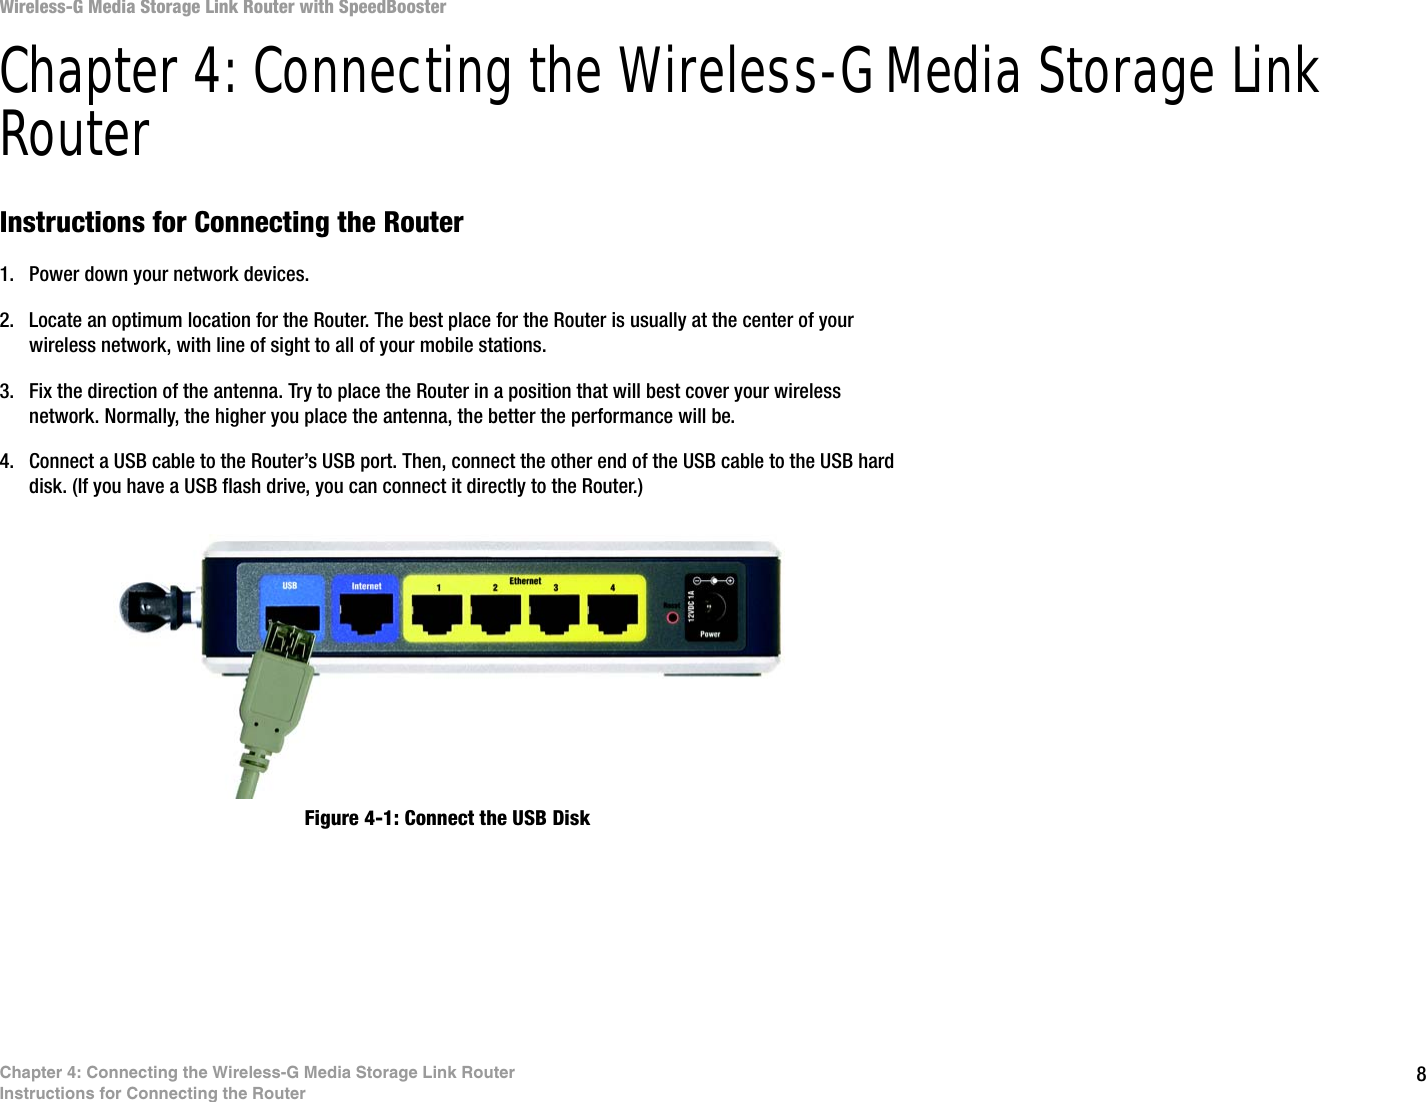 8Chapter 4: Connecting the Wireless-G Media Storage Link RouterInstructions for Connecting the RouterWireless-G Media Storage Link Router with SpeedBoosterChapter 4: Connecting the Wireless-G Media Storage Link RouterInstructions for Connecting the Router1. Power down your network devices.2. Locate an optimum location for the Router. The best place for the Router is usually at the center of your wireless network, with line of sight to all of your mobile stations.3. Fix the direction of the antenna. Try to place the Router in a position that will best cover your wireless network. Normally, the higher you place the antenna, the better the performance will be.4. Connect a USB cable to the Router’s USB port. Then, connect the other end of the USB cable to the USB hard disk. (If you have a USB flash drive, you can connect it directly to the Router.)Figure 4-1: Connect the USB Disk